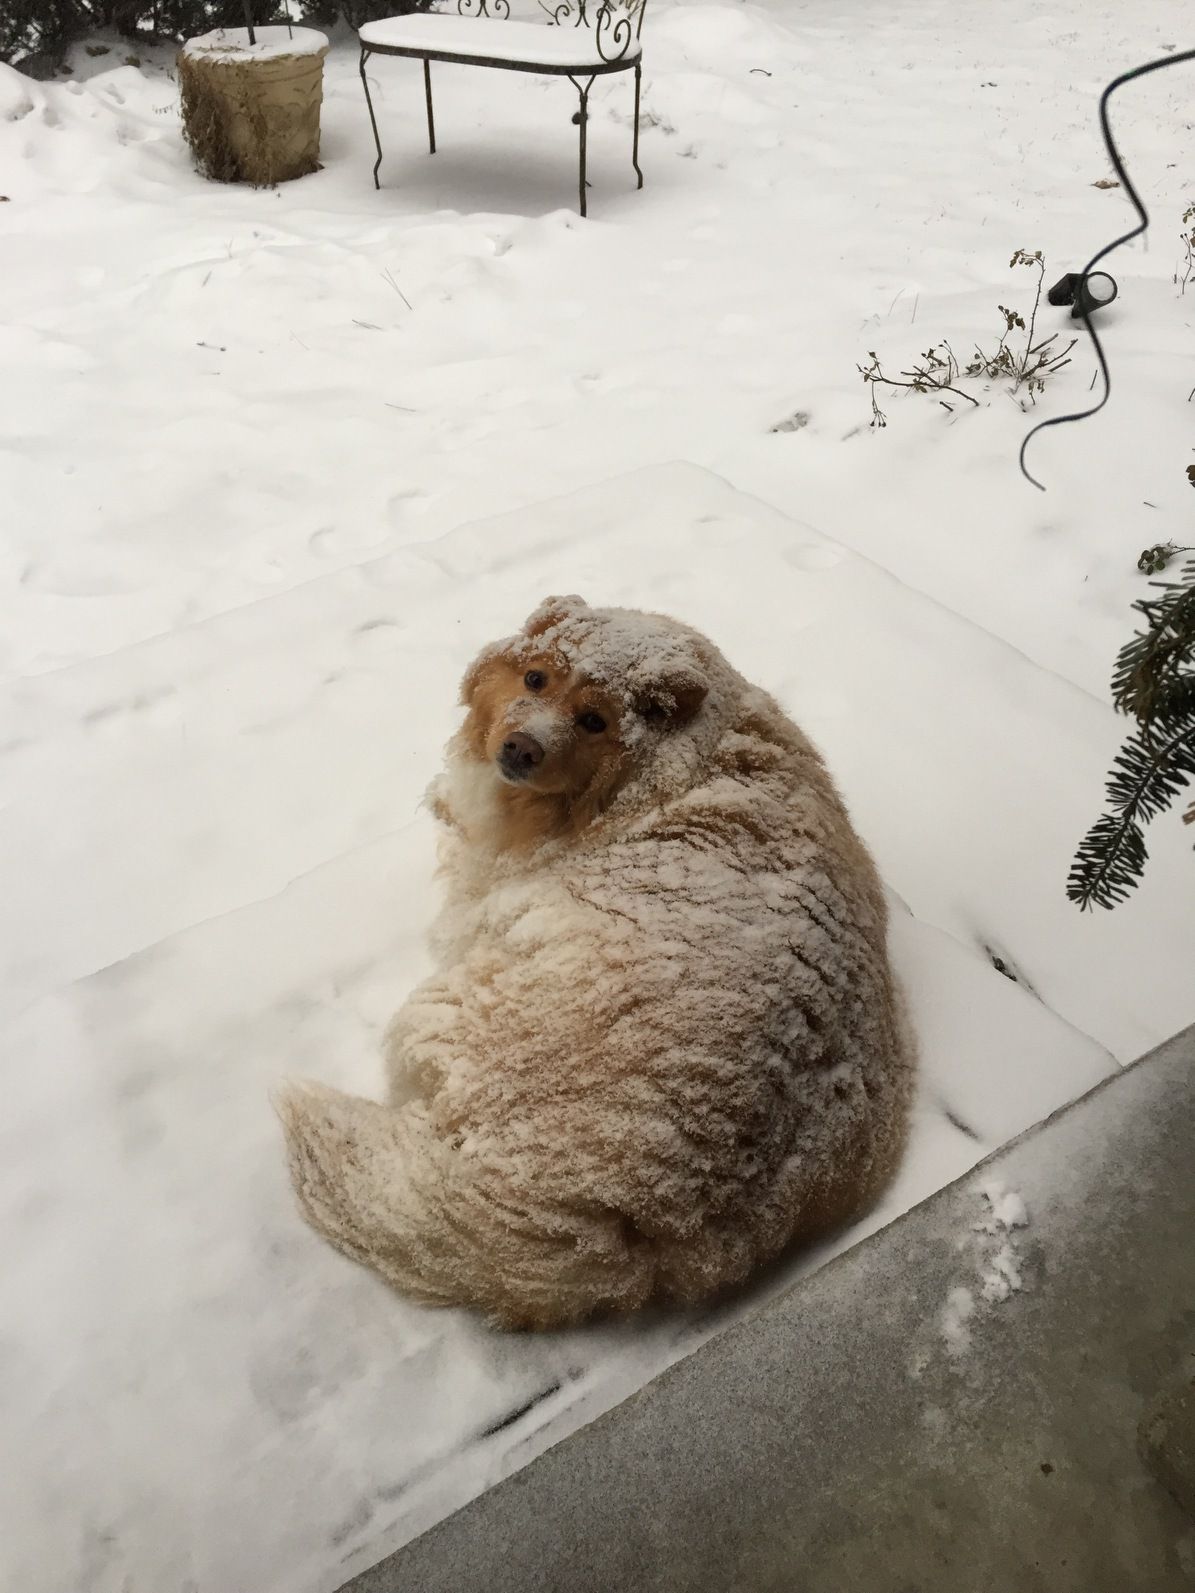 A rare sighting of the North American Snow Loaf.